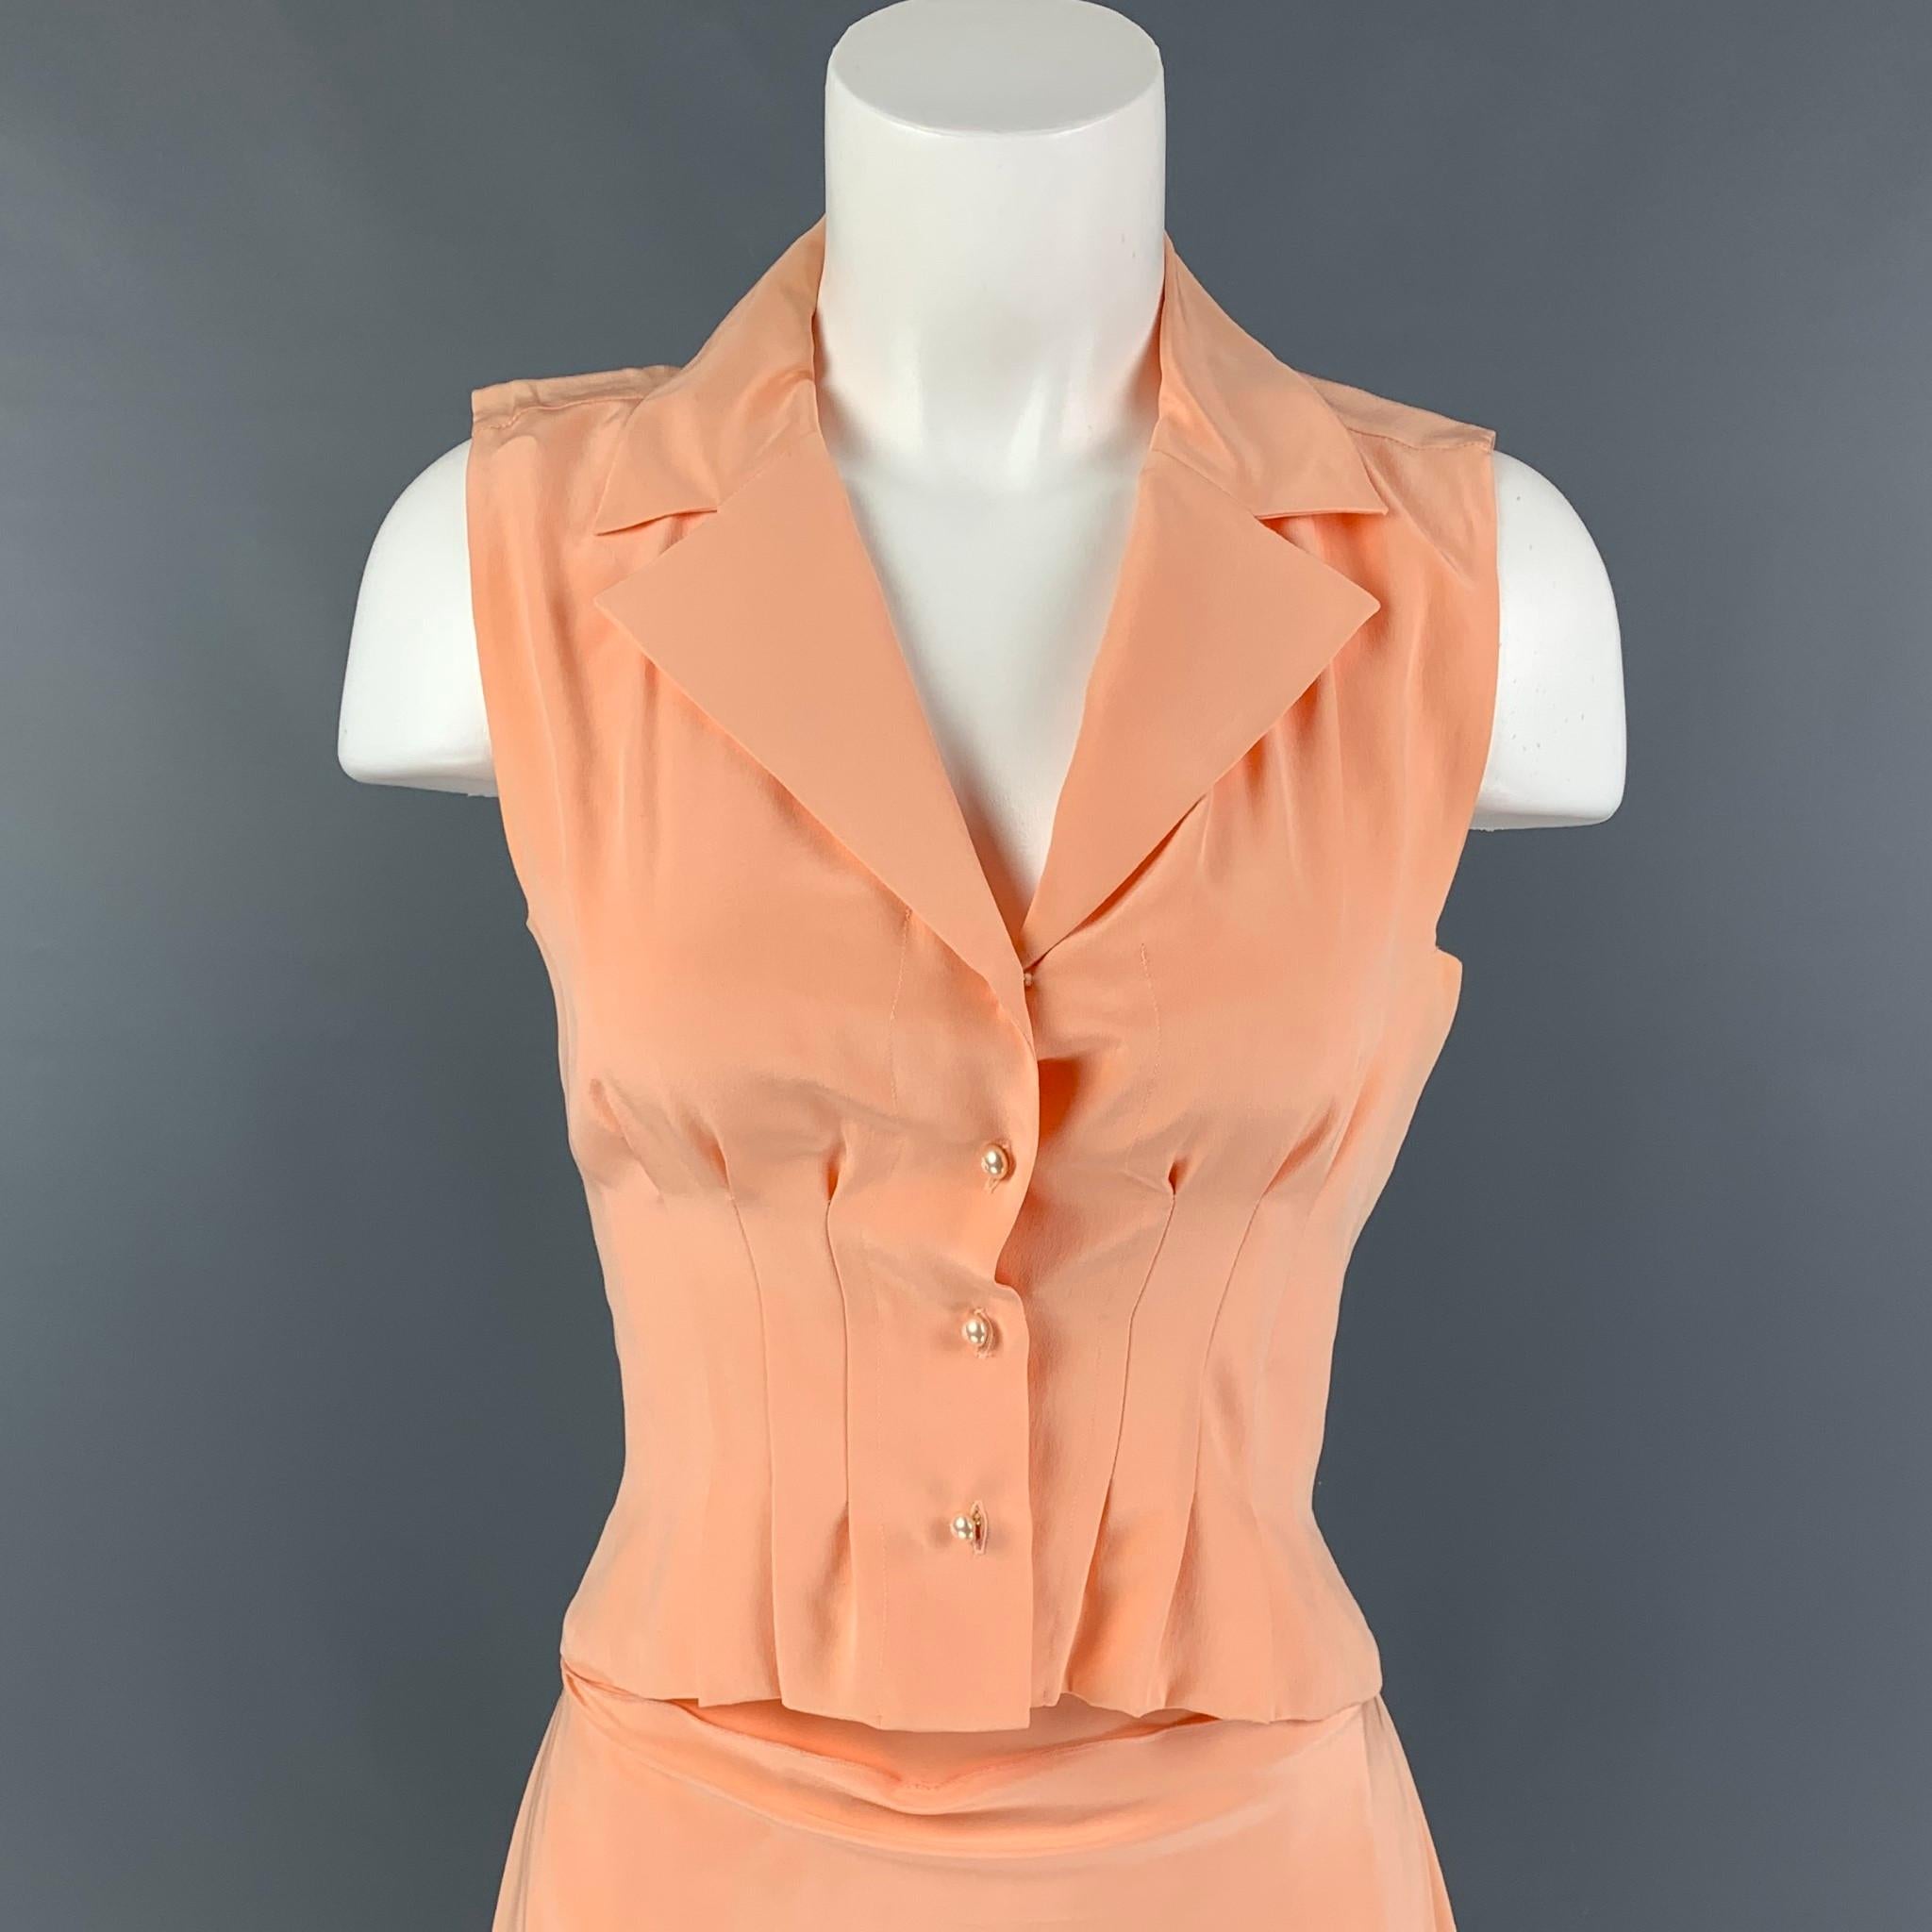 CHANEL skirt set comes in a salmon silk featuring a notch lapel, pleated, sleeveless, logo buttons, and a matching layered pleated skirt. Made in France. 

Very Good Pre-Owned Condition.
Marked: AJ508 03P / 36

Measurements:

-Blouse
Shoulder: 13